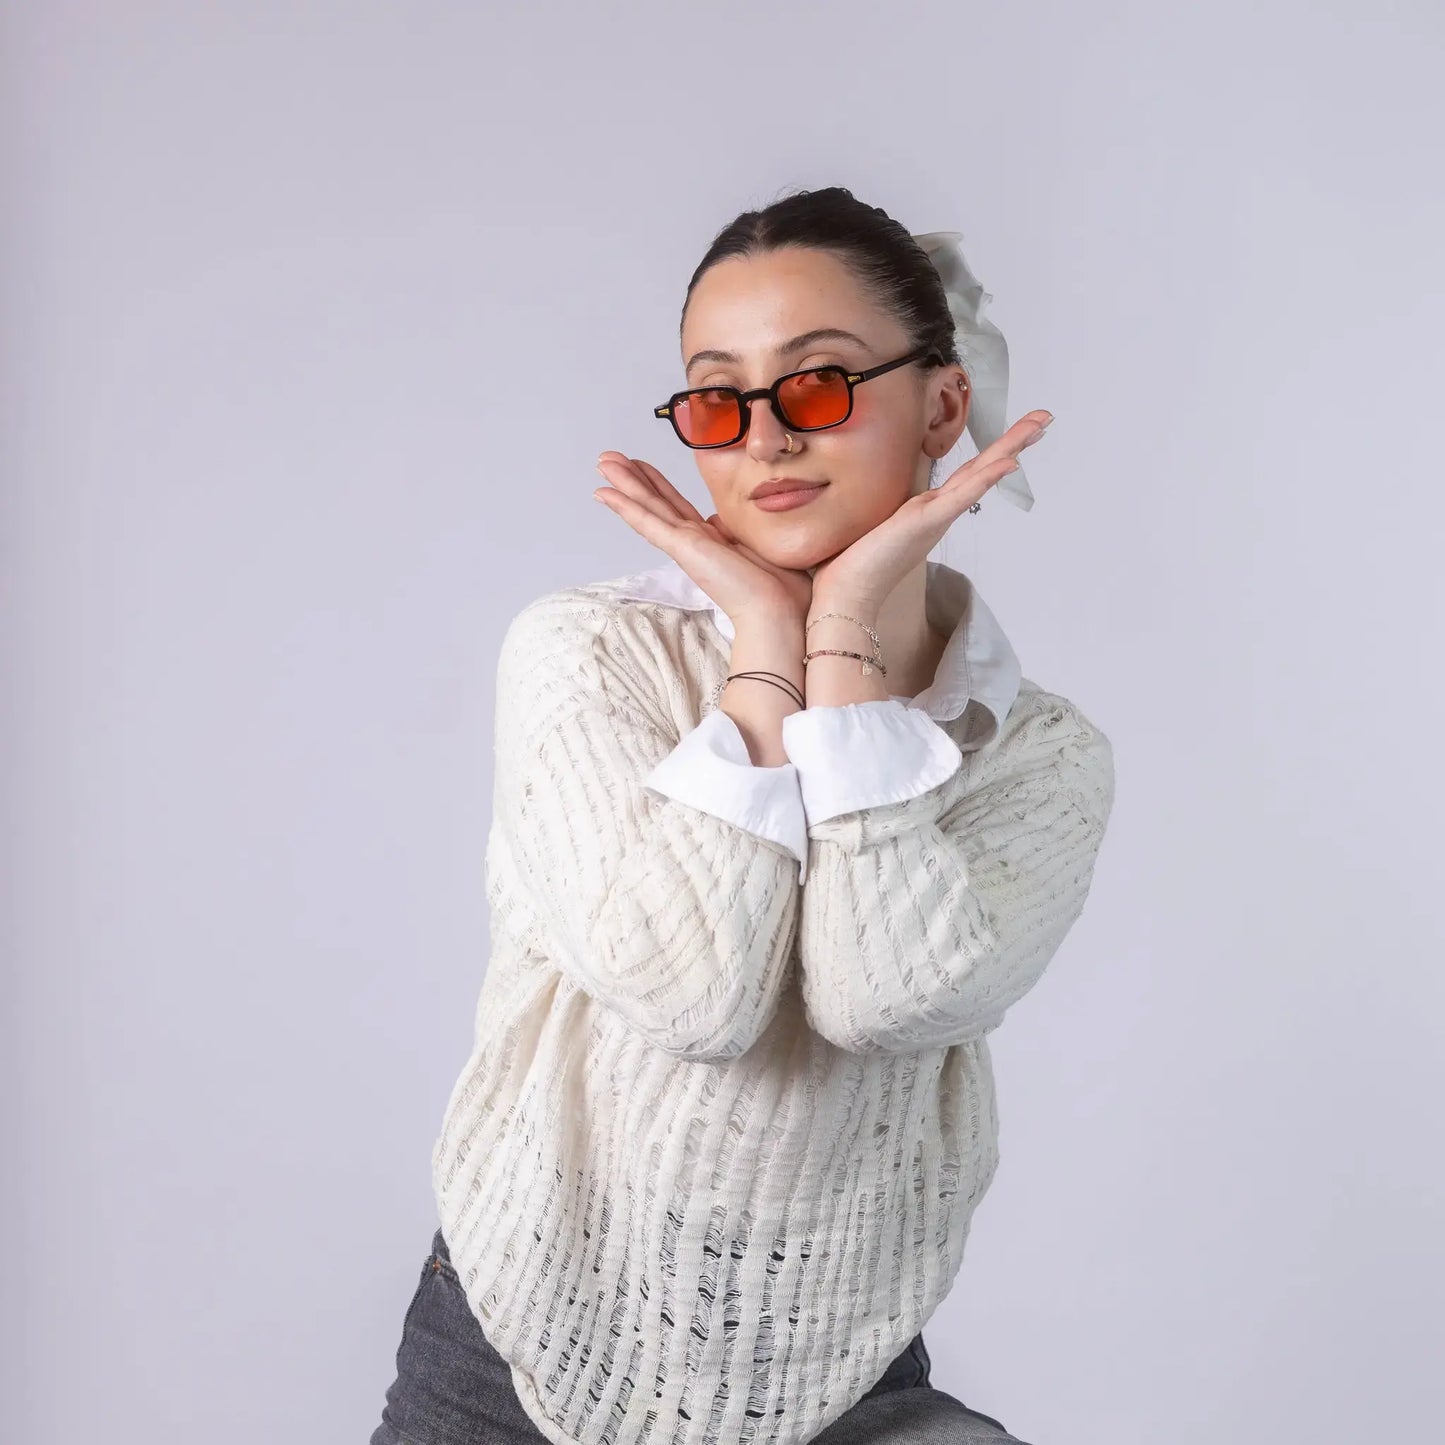 A female model wearing Exposure Sunglasses polarized sunglasses with black frames and red lenses, posing against a white background.